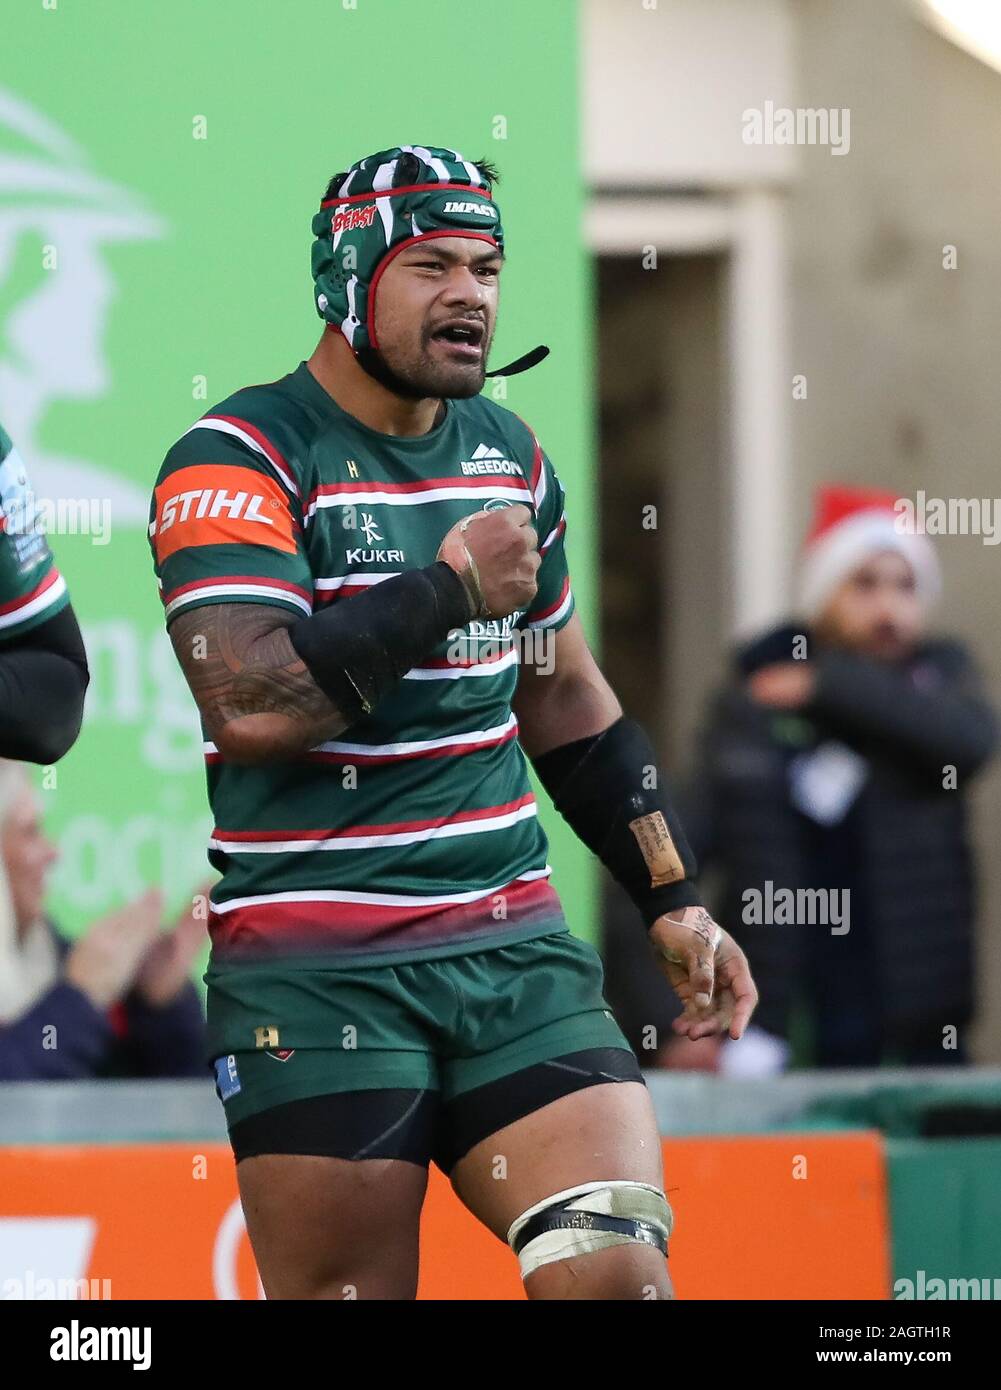 21.12.2019 Leicester, England. Rugby Union. Jordan Taufua celebrates  scoring for Tigers in the 13th minutes of the Gallagher Premiership round 6  match played between Leicester Tigers and Exeter Chiefs at the Welford